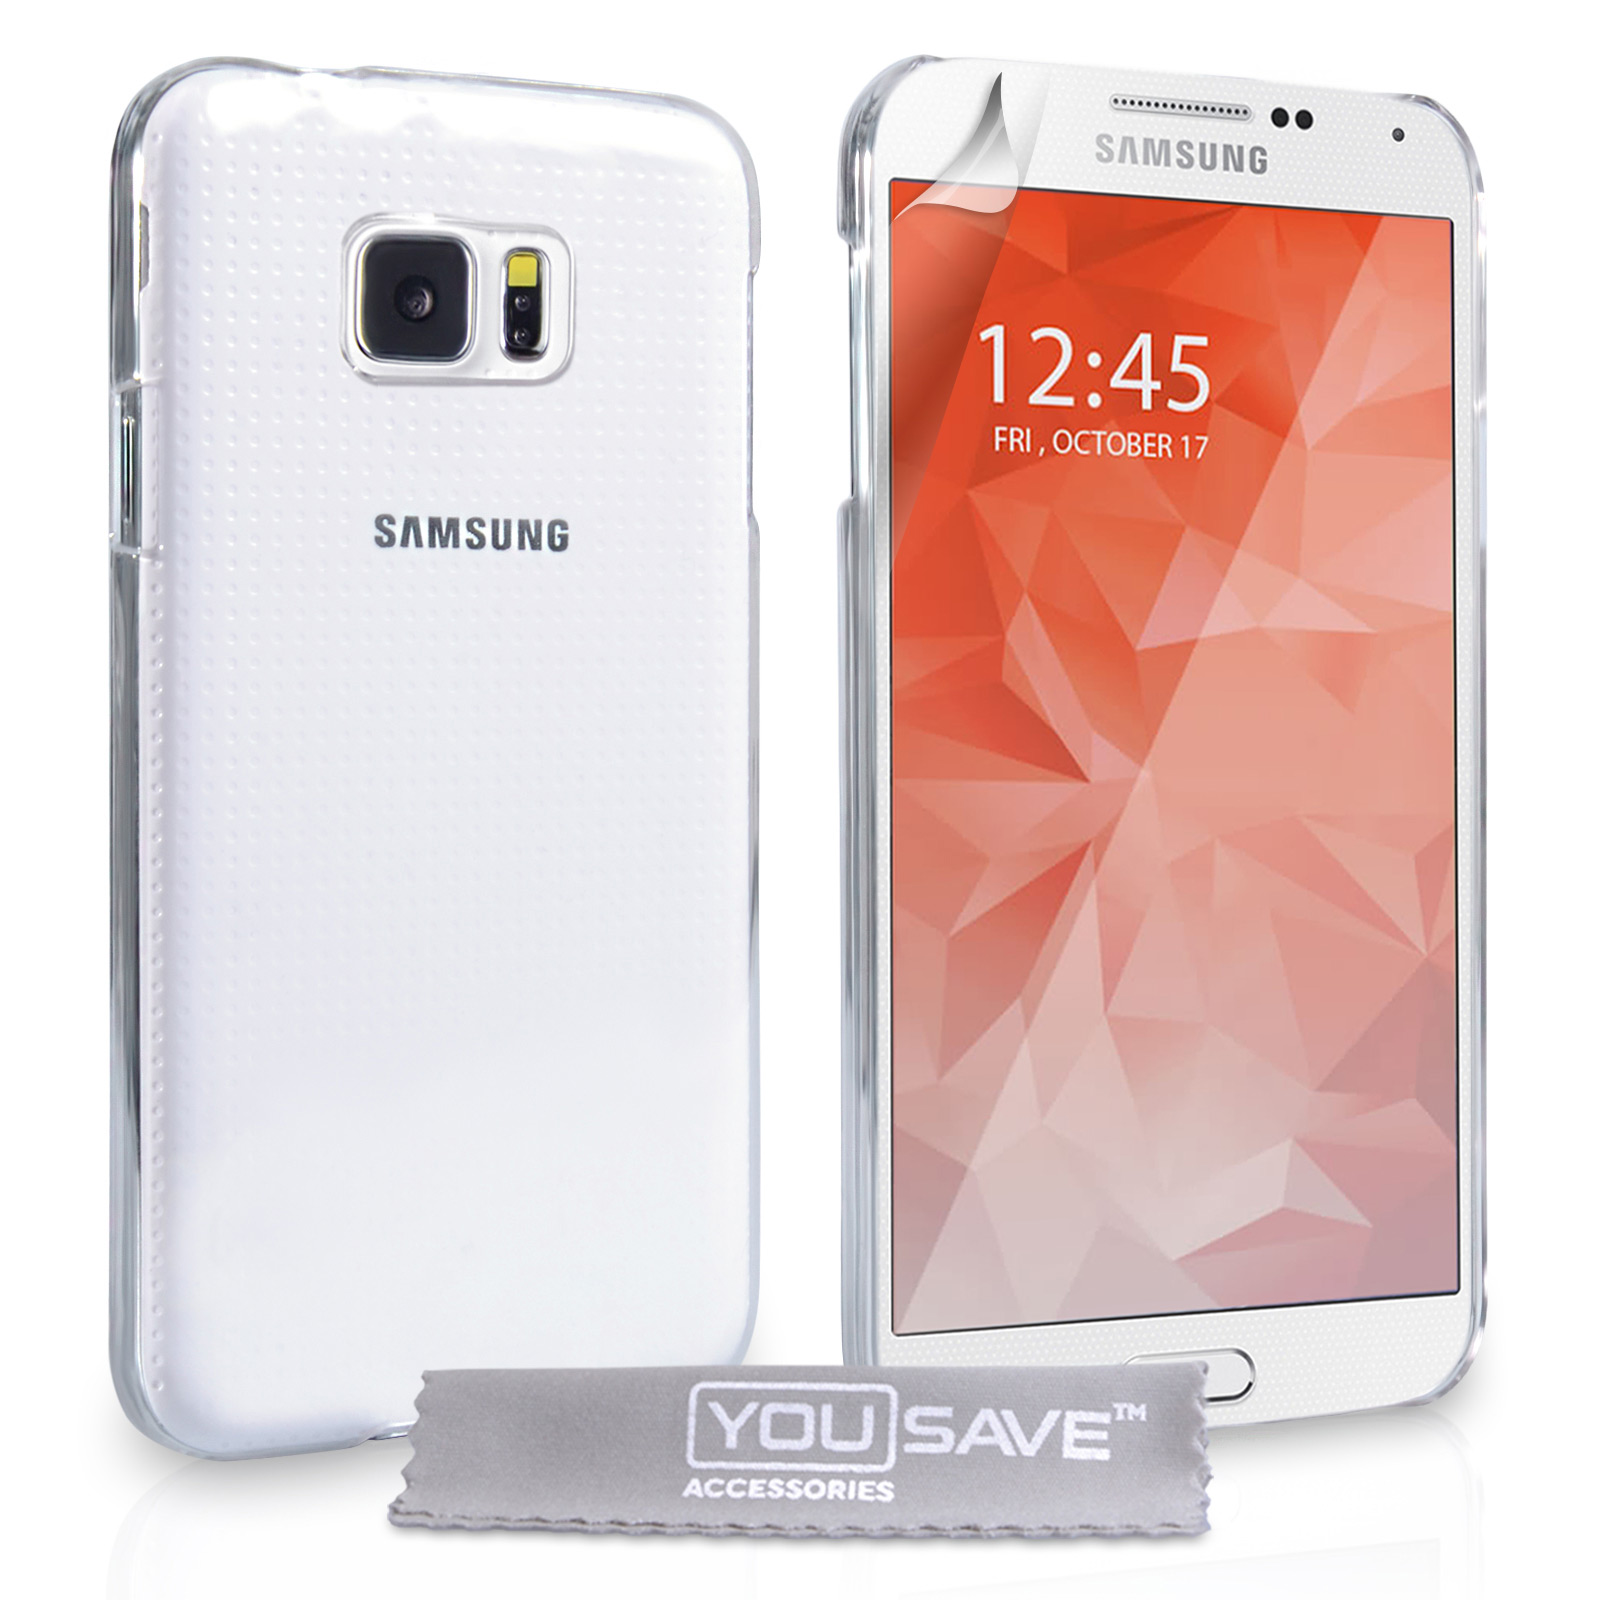 YouSave Accessories Samsung Galaxy S6 Hard Case - Crystal Clear